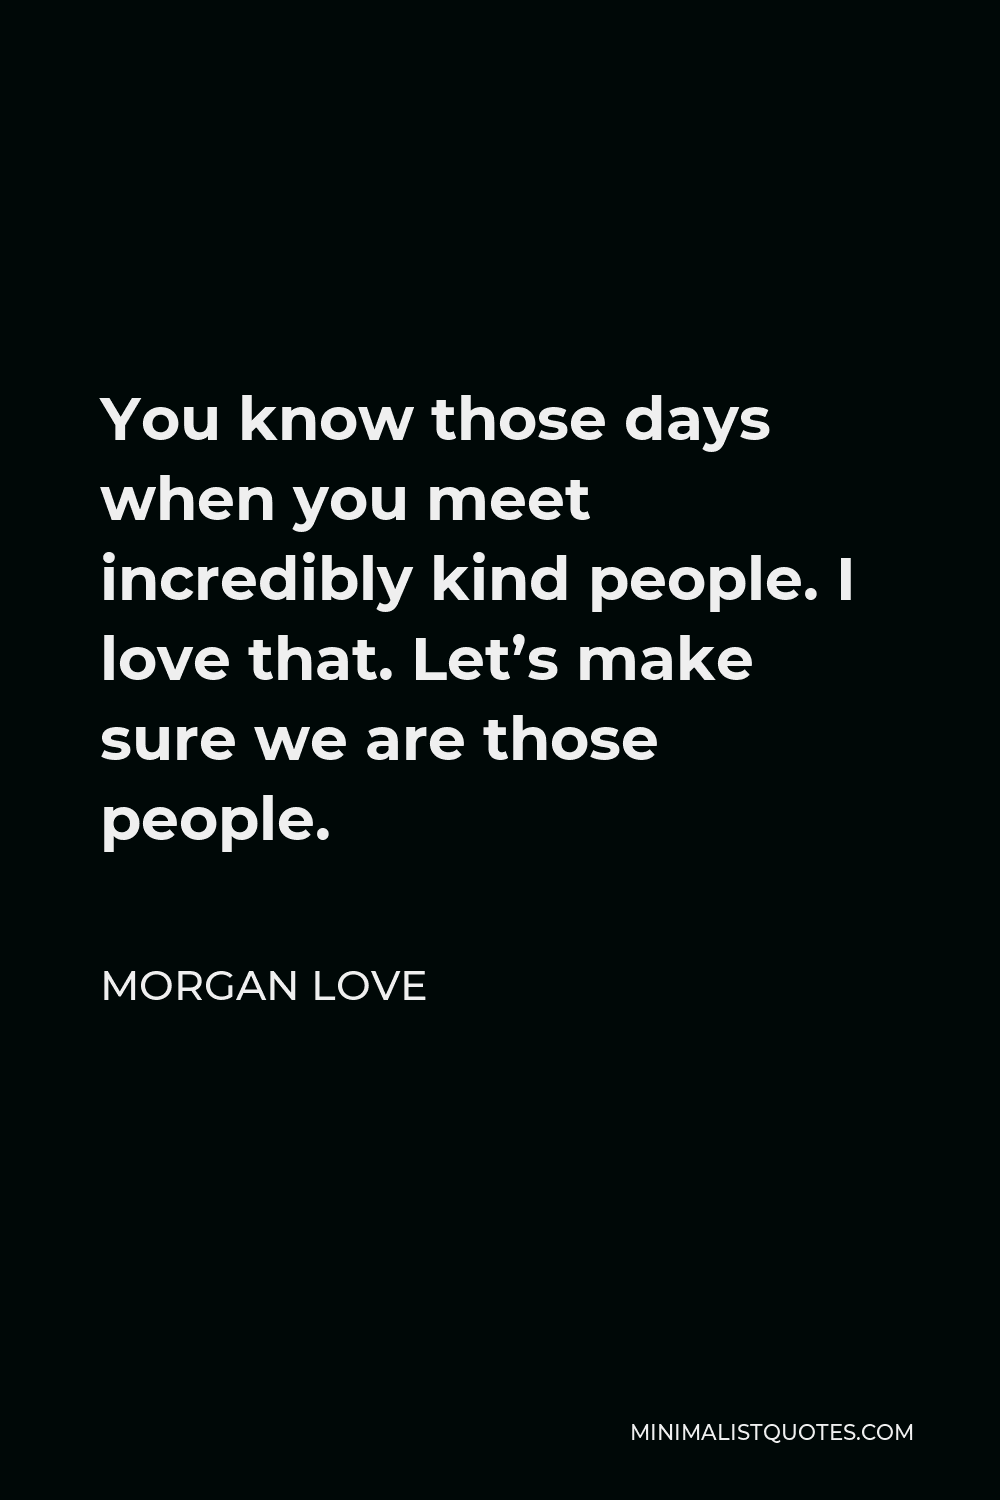 Morgan Love Quote - You know those days when you meet incredibly kind people. I love that. Let’s make sure we are those people.